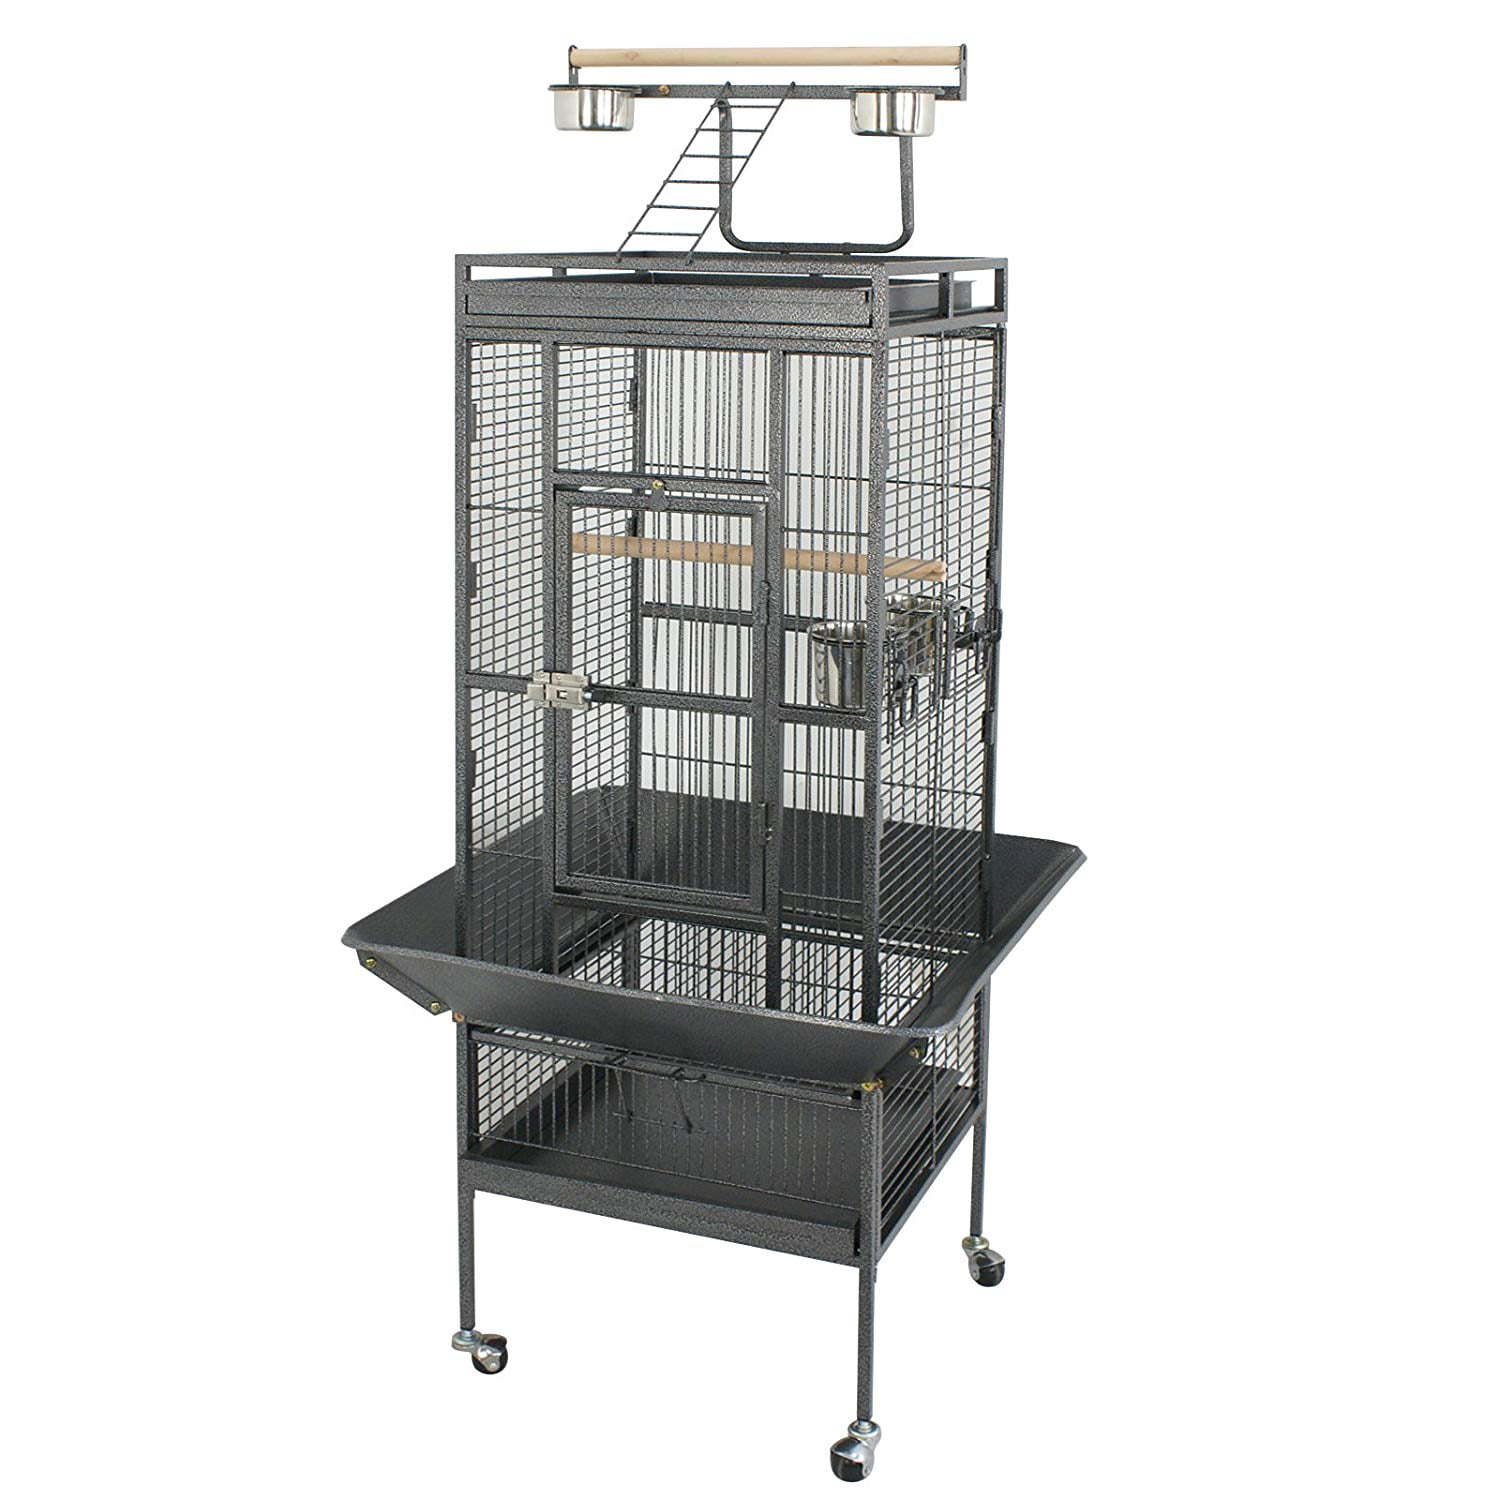 Rolling Stand The Fellie Bird Cage Large Metal Parrot Bird Cage for African Grey Parakeets Cockatiels with Perch Stand Mobile Wheels and Roof 52x52x160cm